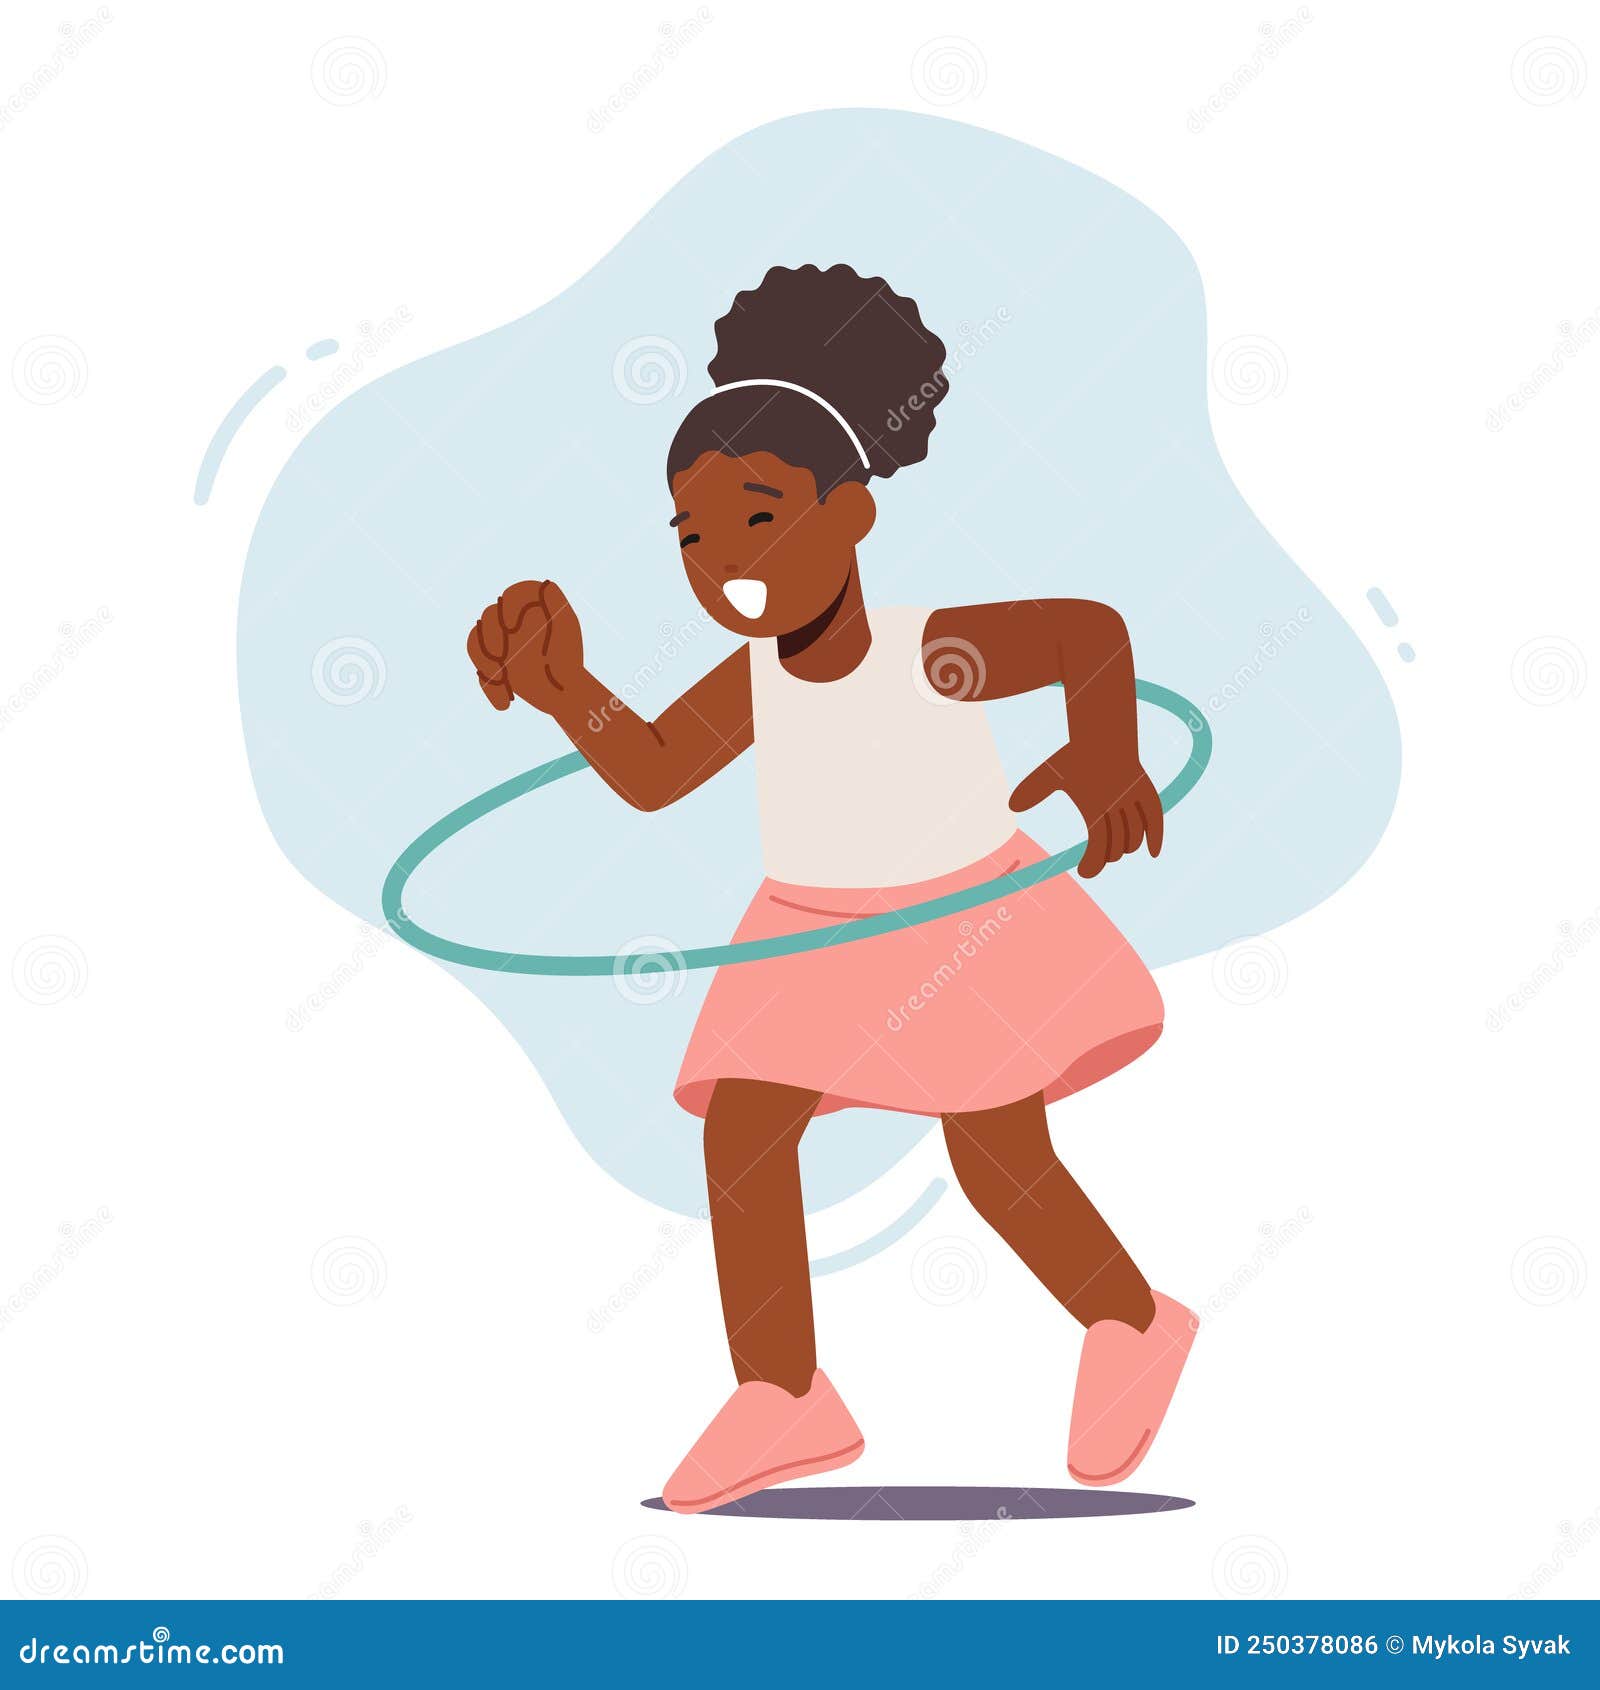 Funny African Girl Playing with Hula Hoop Isolated on White